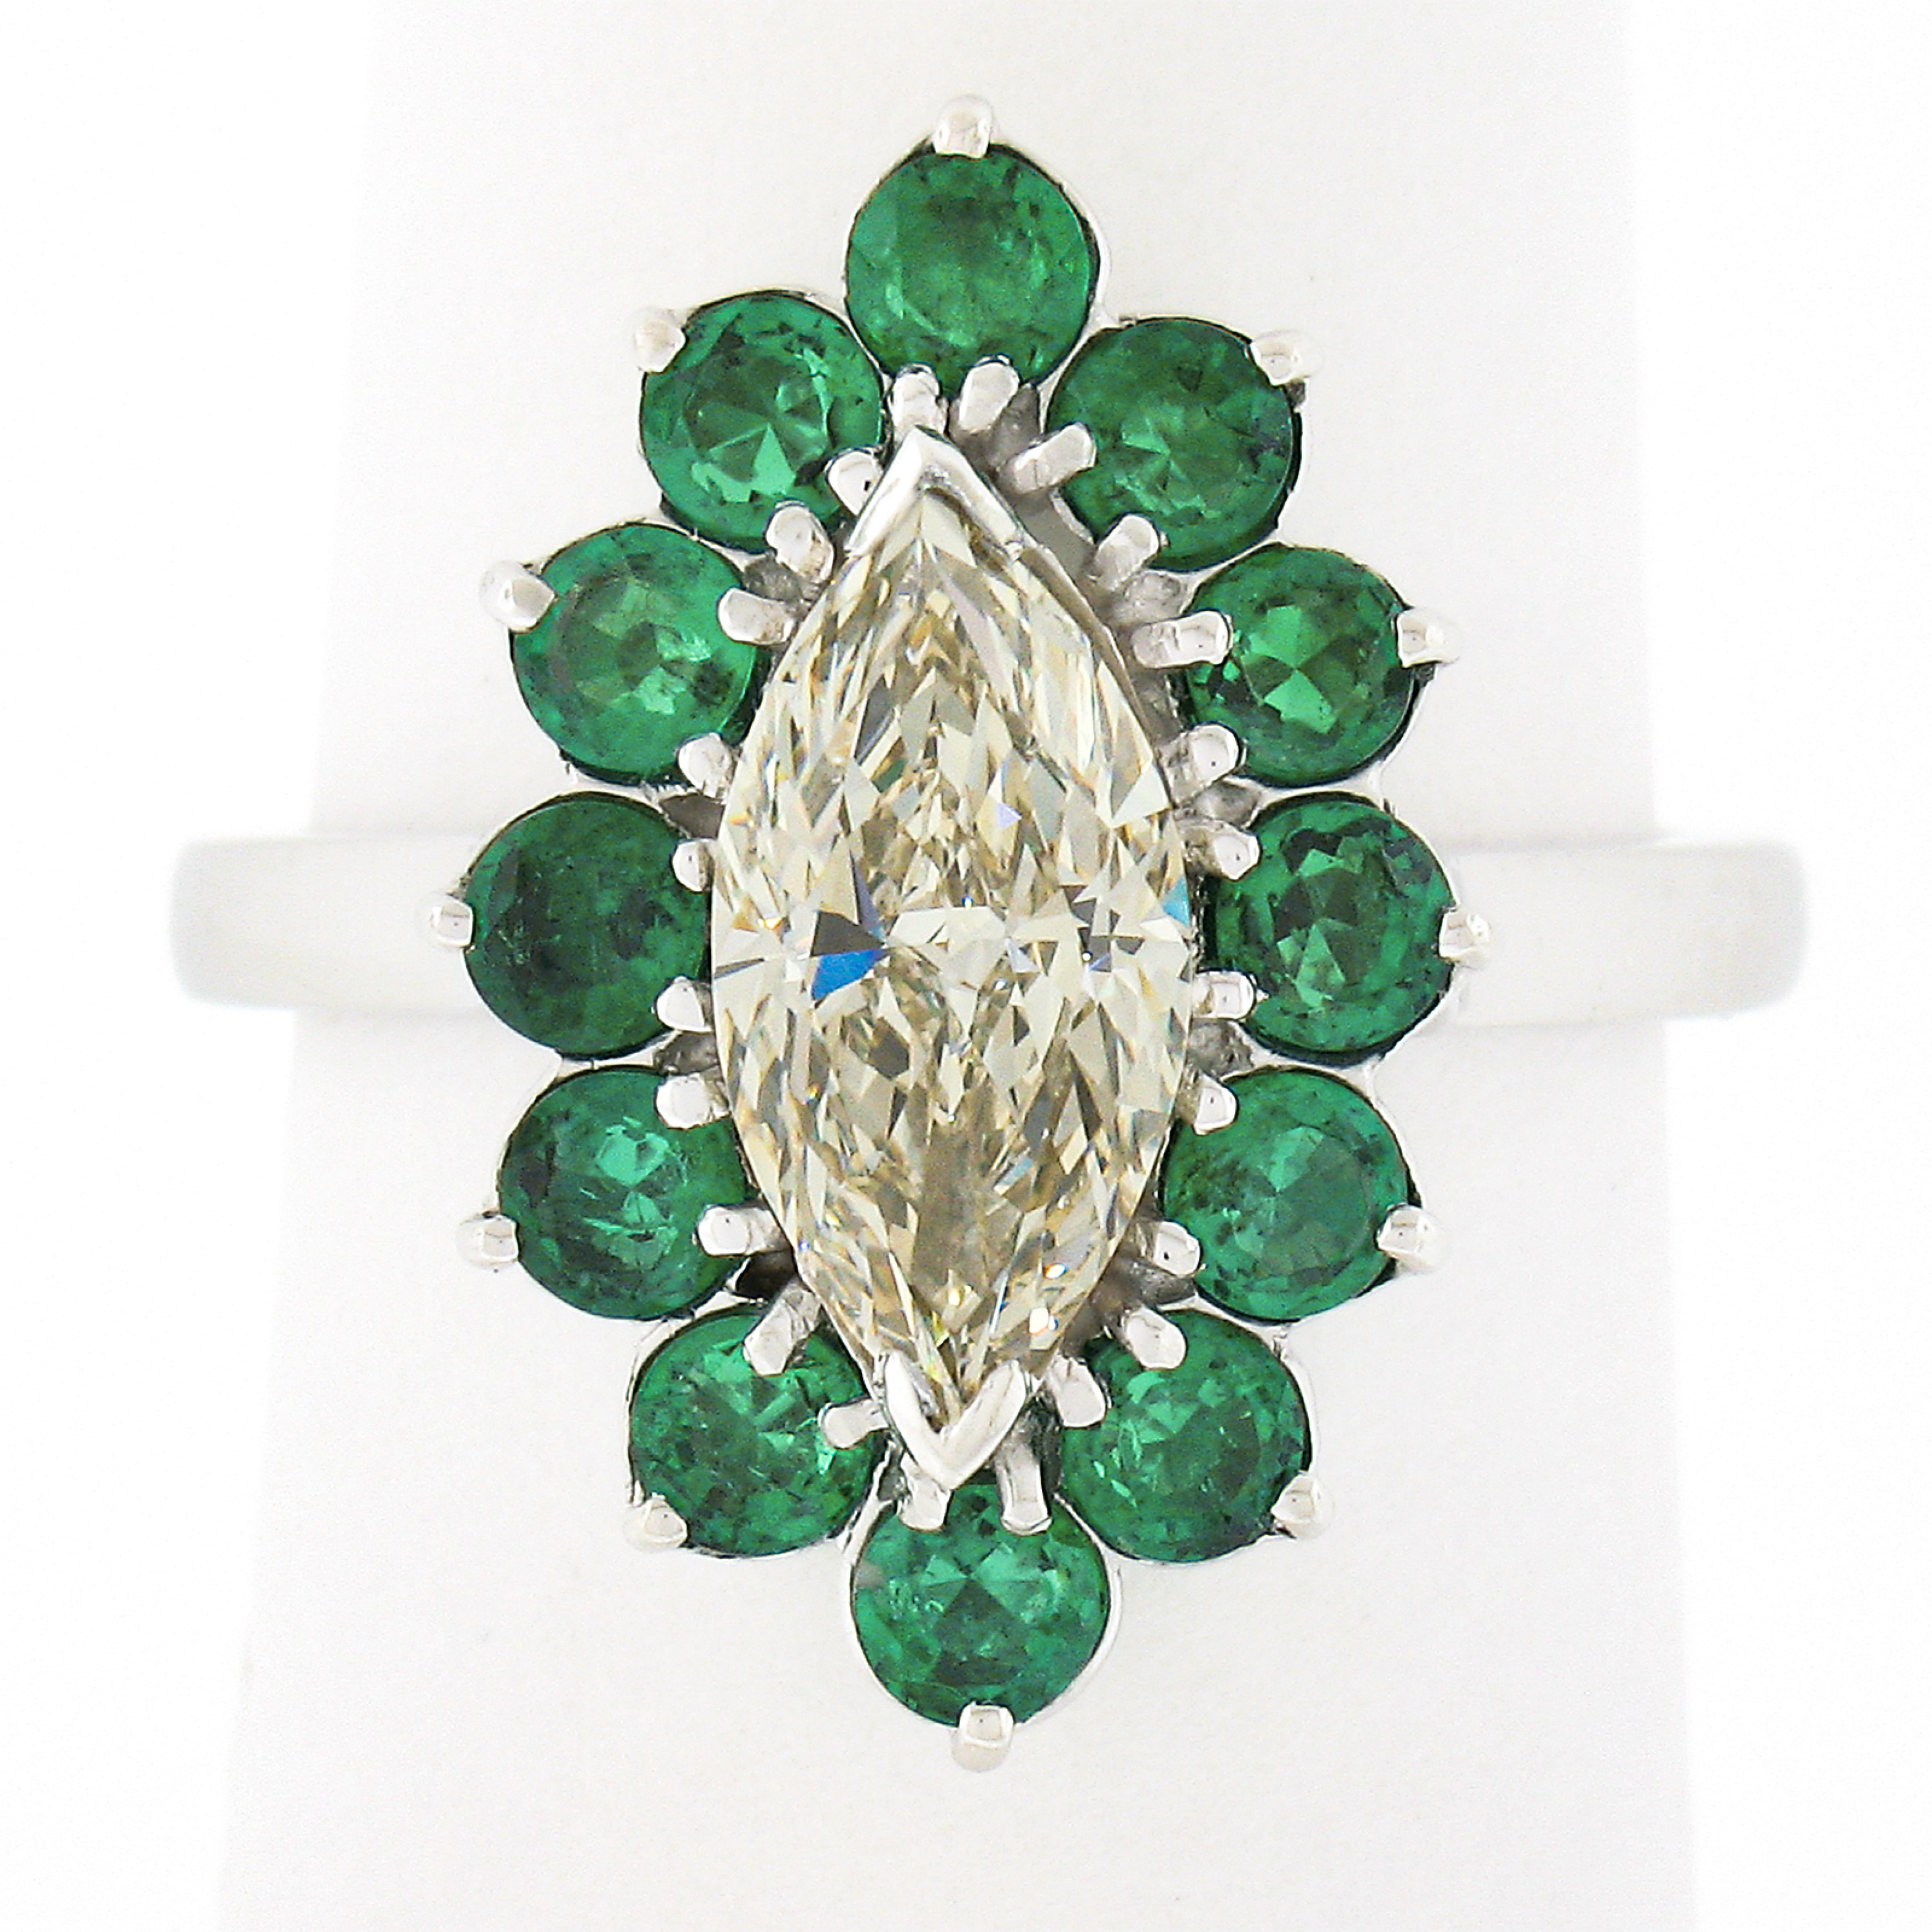 You are looking at a truly breathtaking diamond and emerald ring that is crafted in solid platinum. It features a stunning, marquise cut, light yellow diamond neatly prong set at the center and displays a lovely and warm light yellow color and